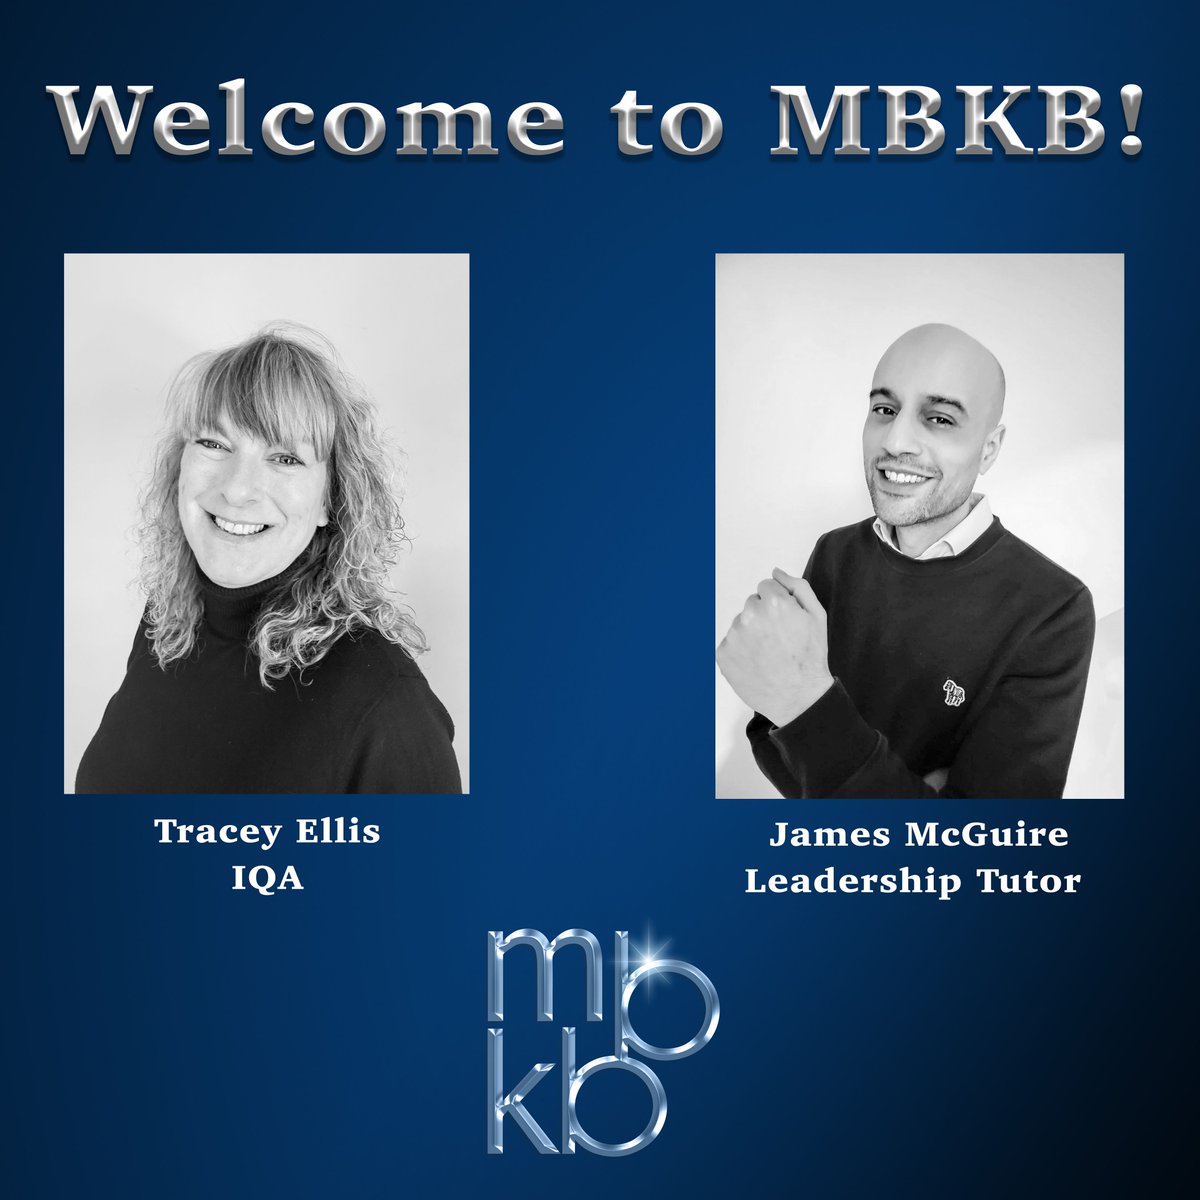 Exciting News! 🌟

We're thrilled to welcome two exceptional individuals to Team MBKB: Tracey Ellis and James McGuire! 🚀

A warm welcome to our growing team! 🤝 Let's achieve greatness together!

#MBKB #MBKBTraining #OutstandingTrainingProvider #TeamMBKB #TeamExpansion